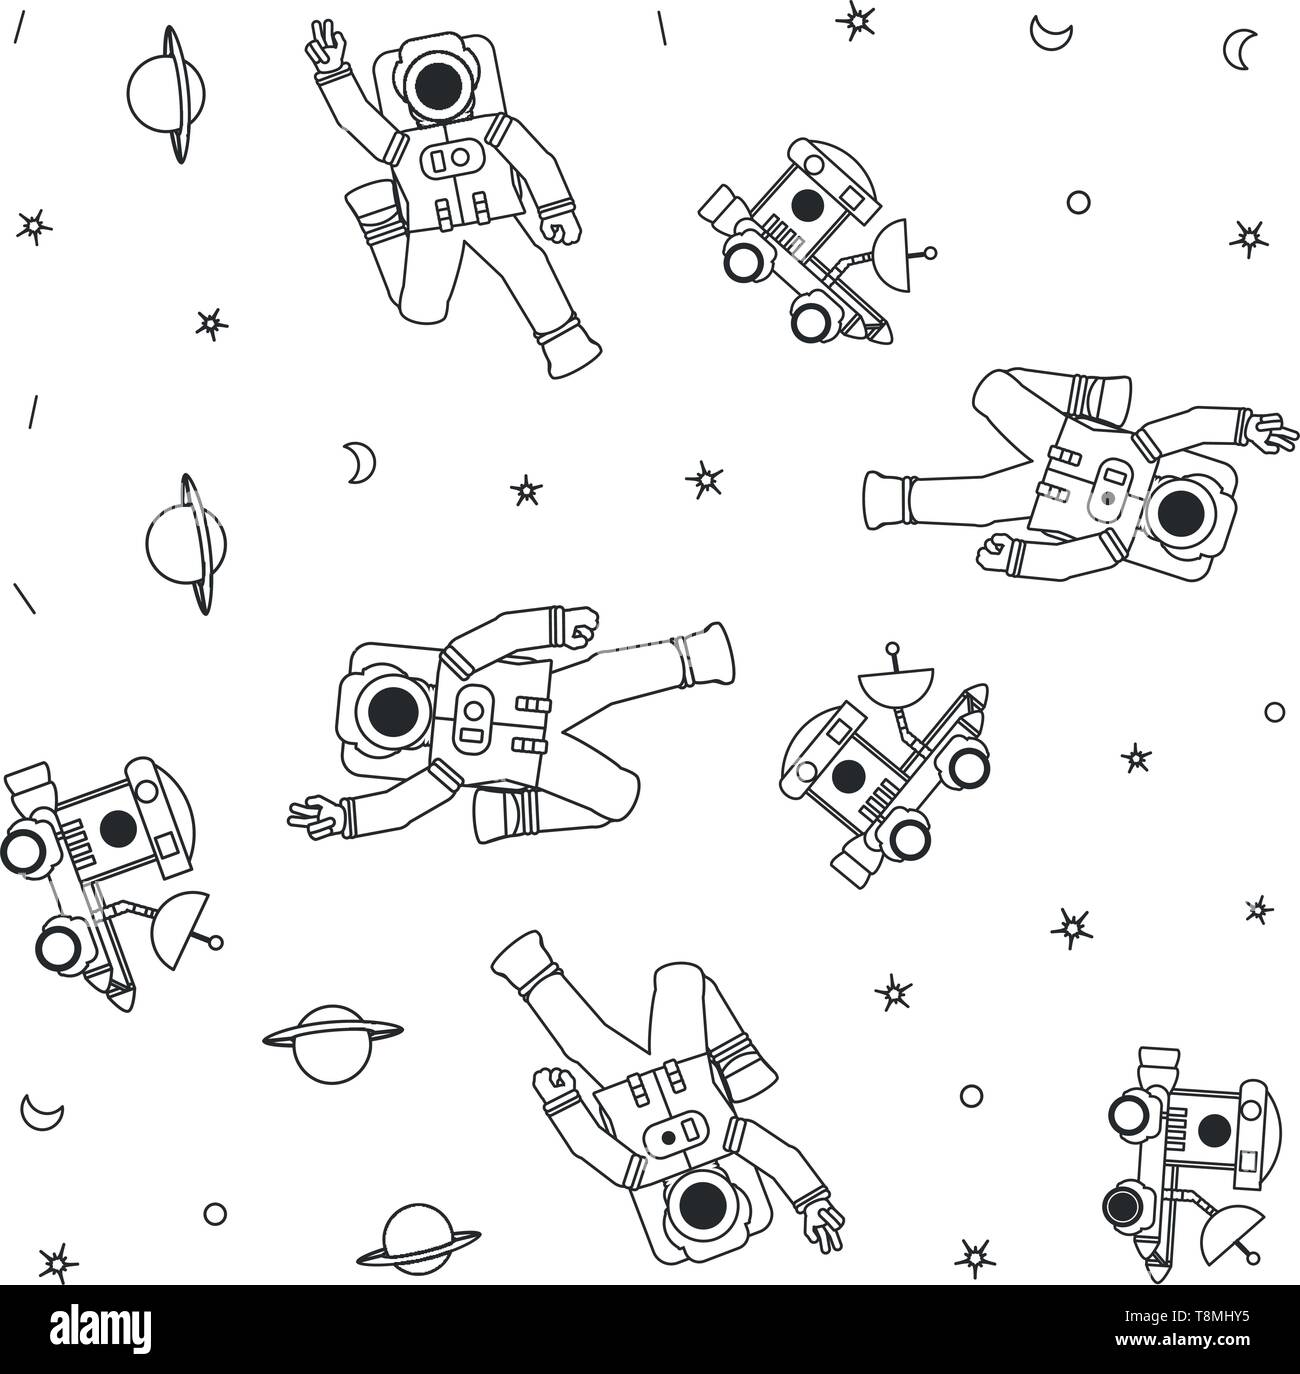 pattern on spaces explorers cars with astronauts suits vector ...